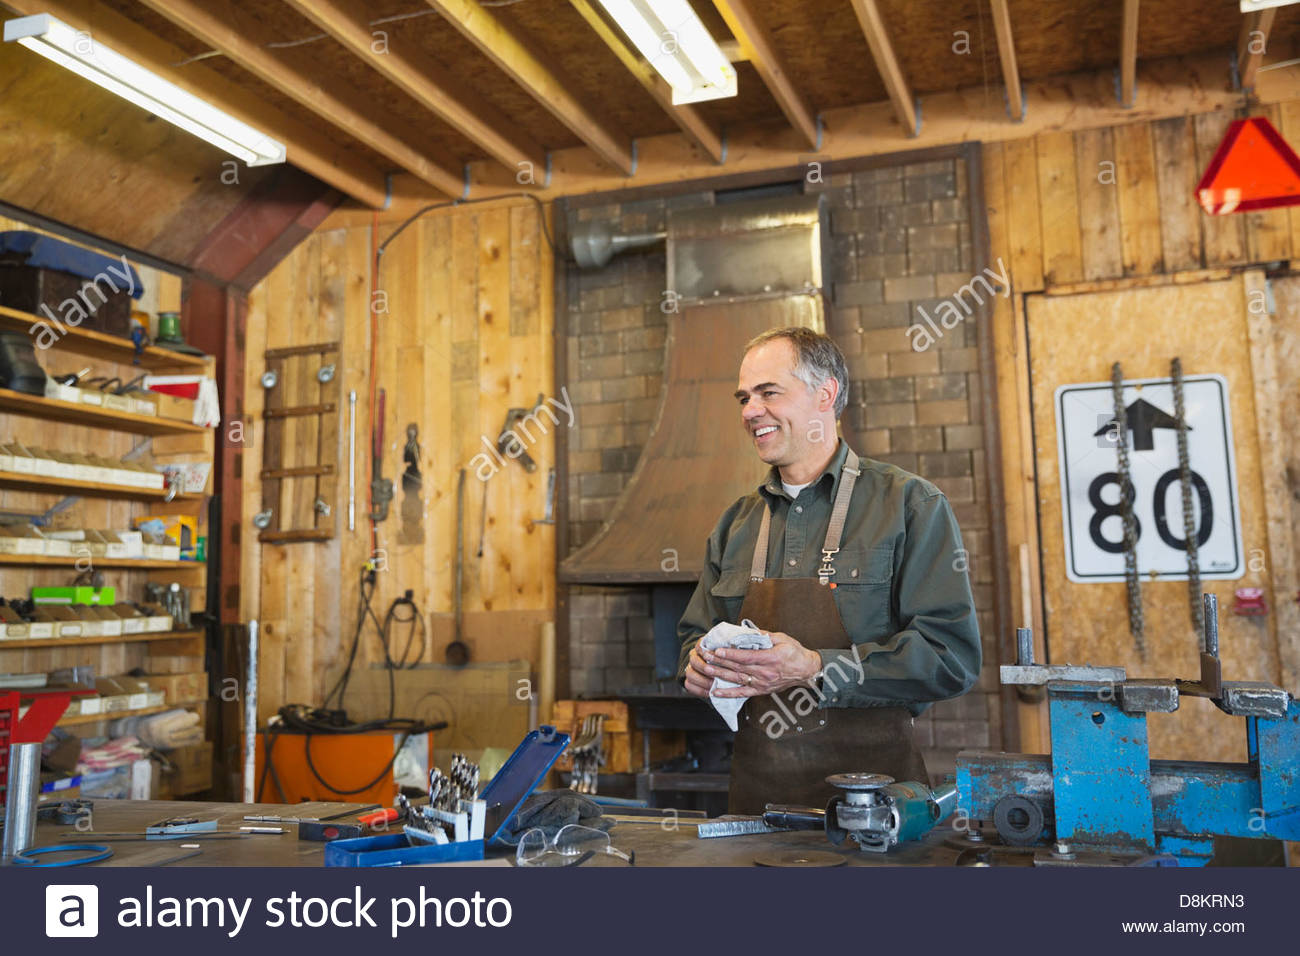 Metalworker cleaning up at workbench Stock Photo